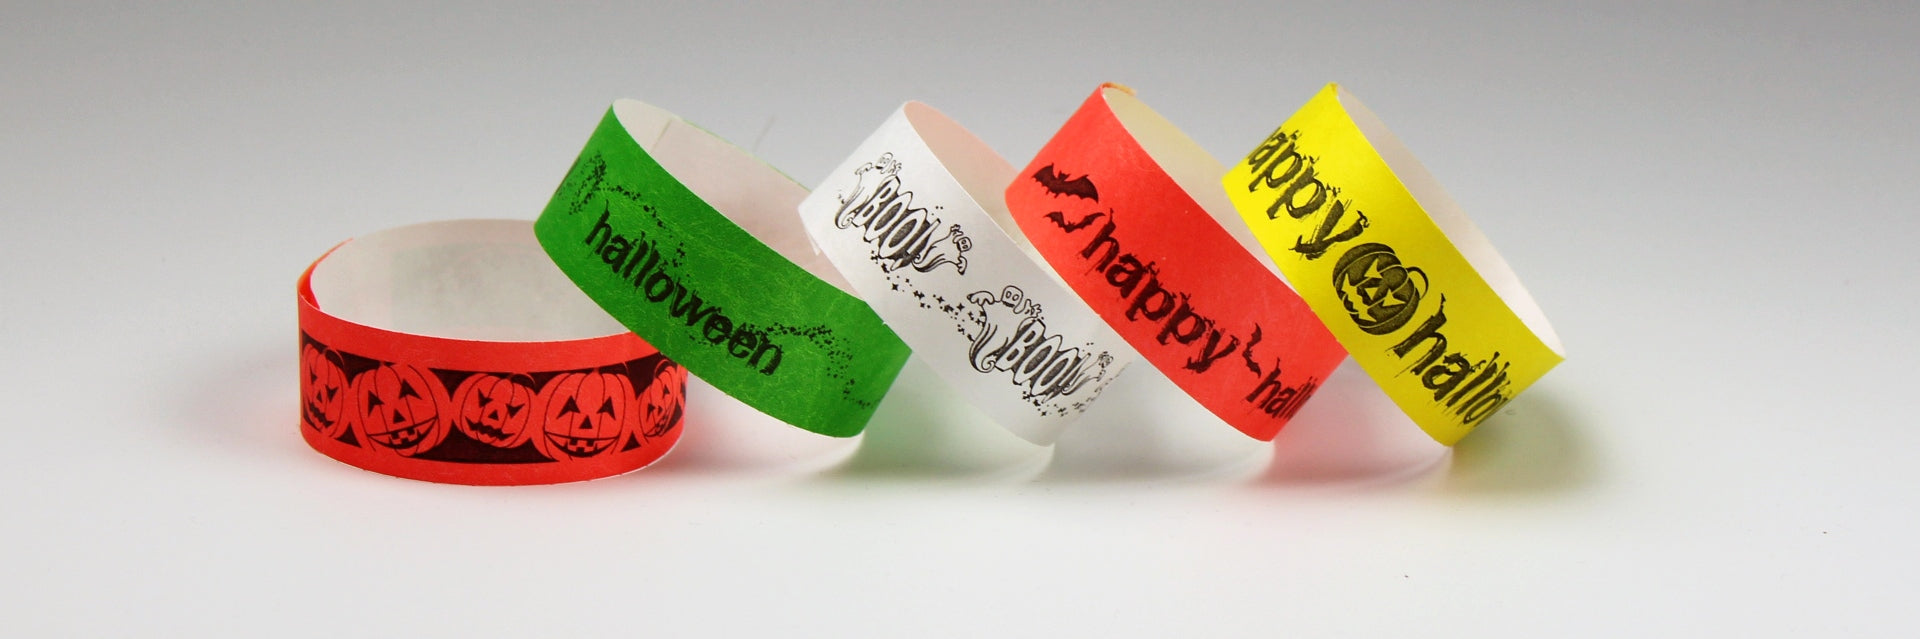 Wristbands for Halloween and Other Fun Fall Events